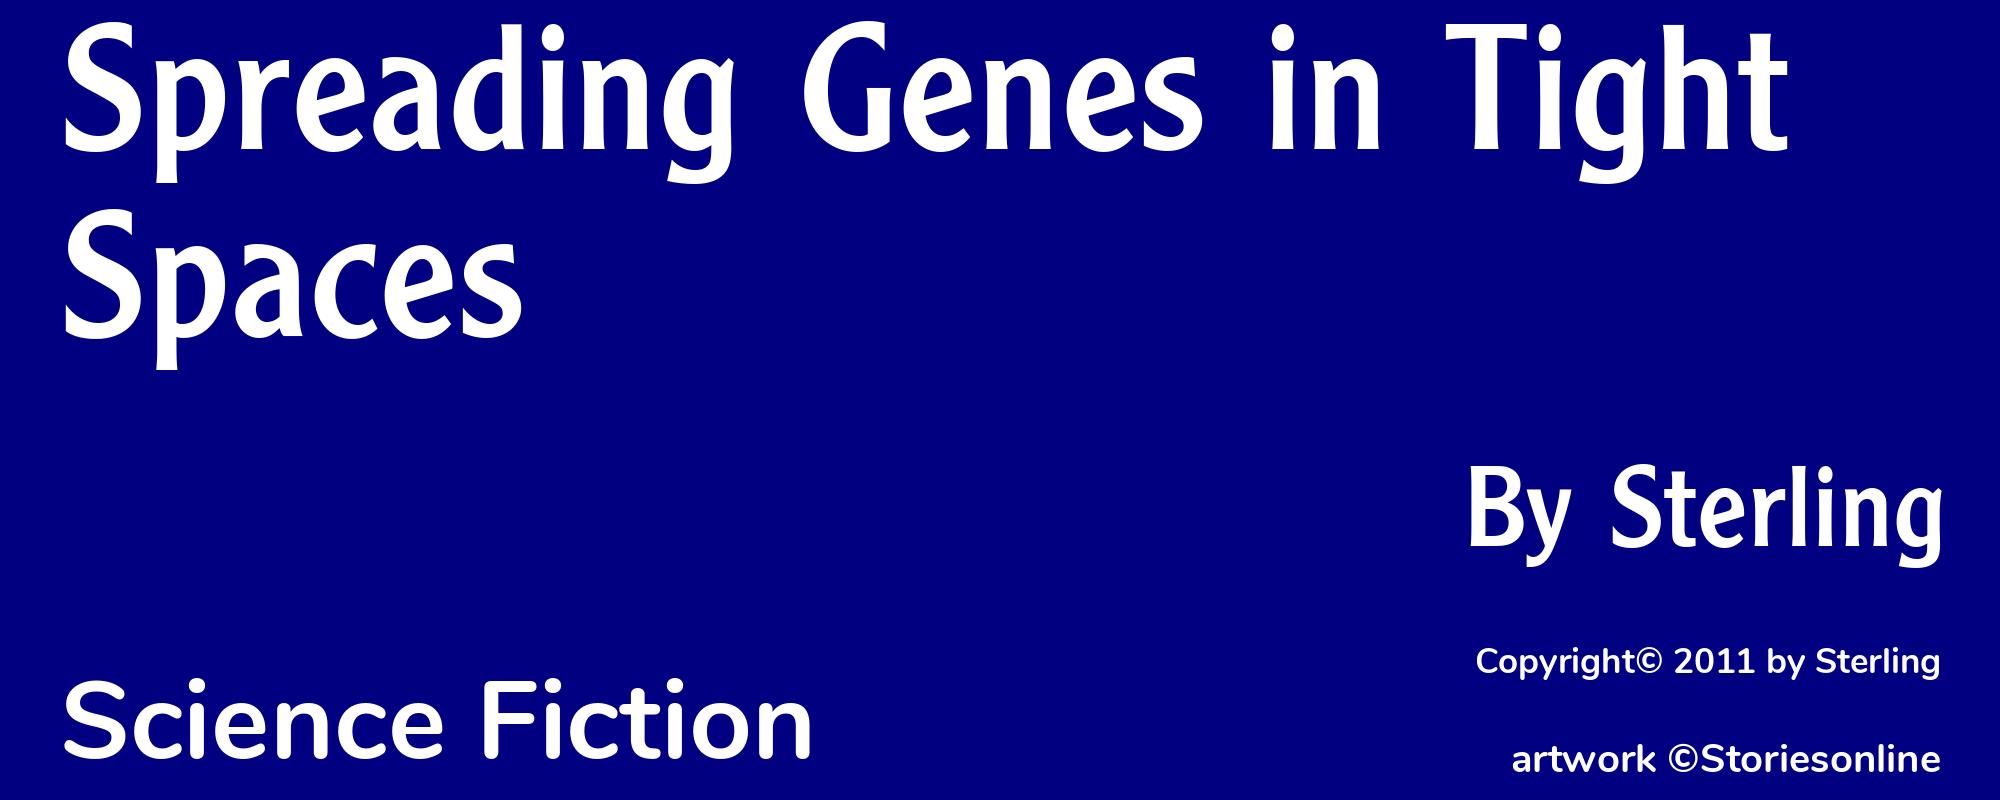 Spreading Genes in Tight Spaces - Cover